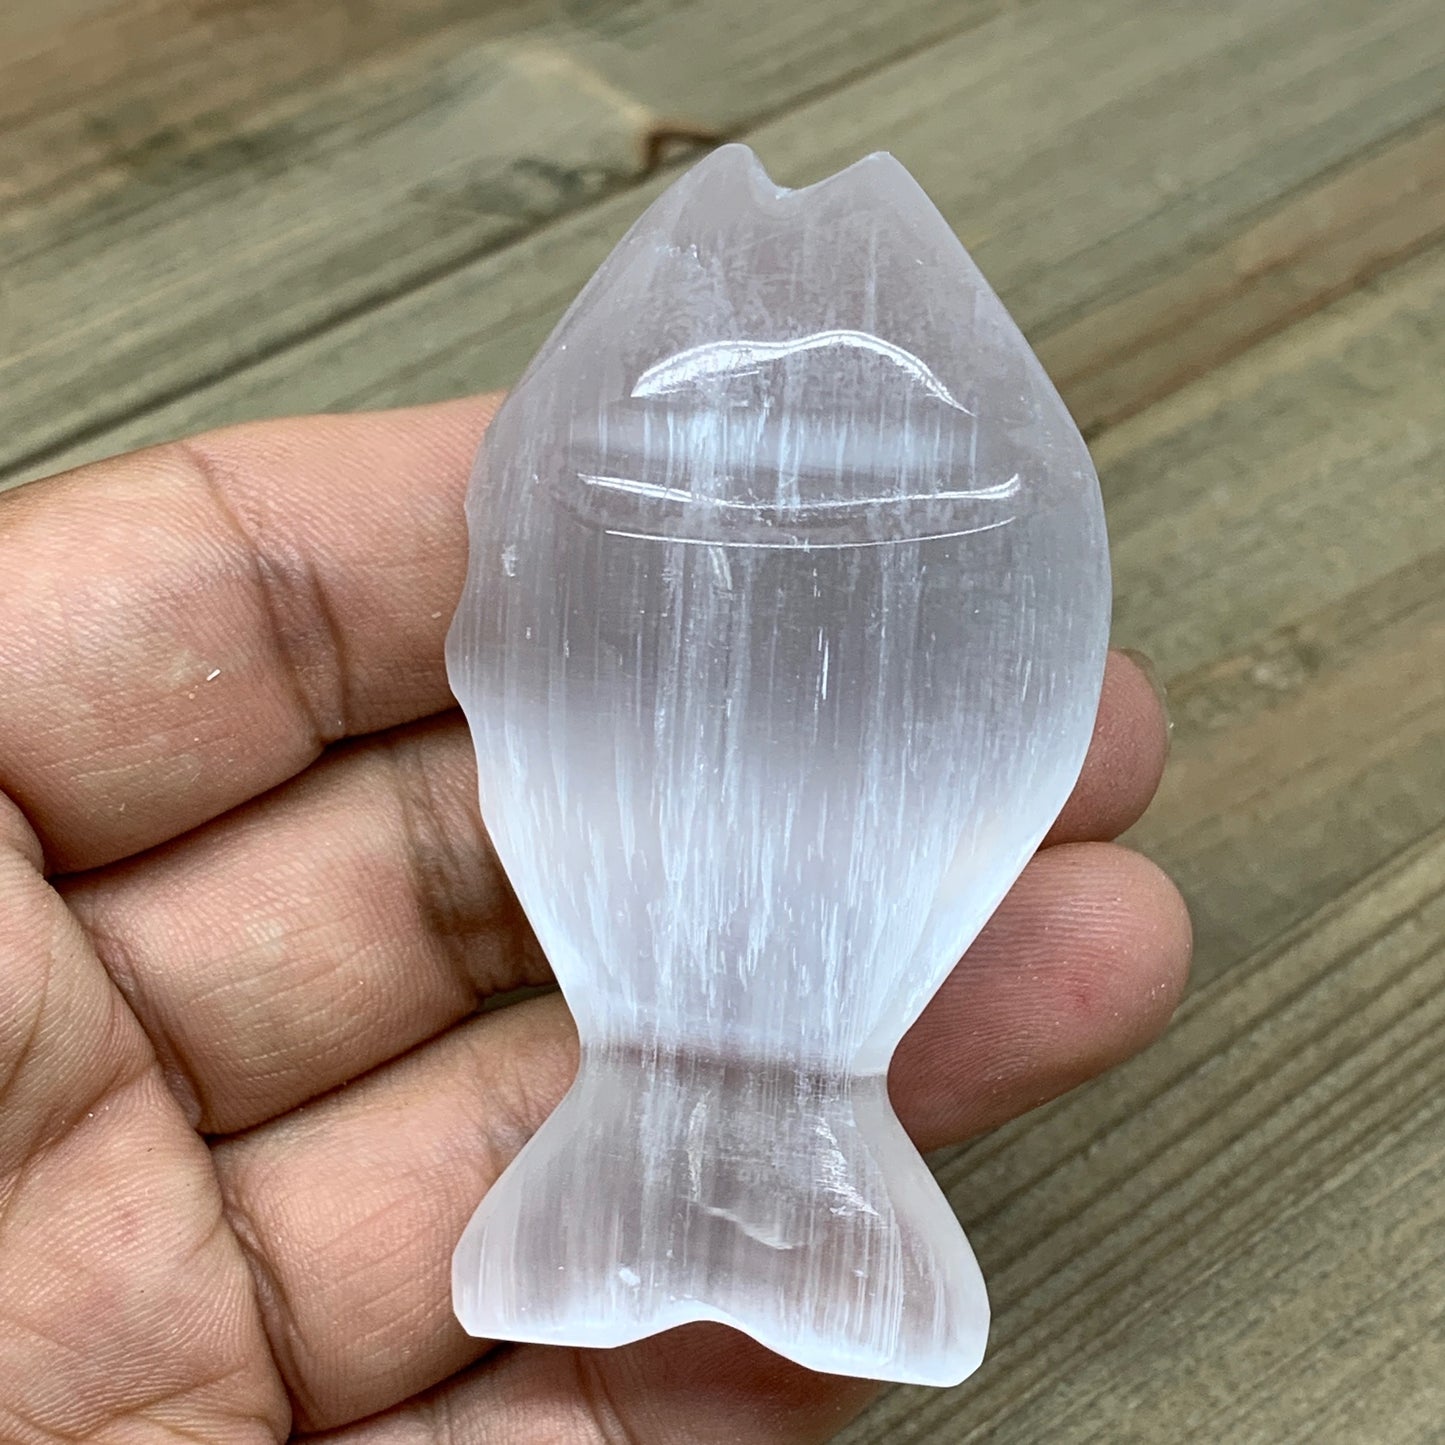 1pc, 45-60g, 2.7"x1.5"x0.9" White Selenite Fish, Handcrafted Crystal @Morocco